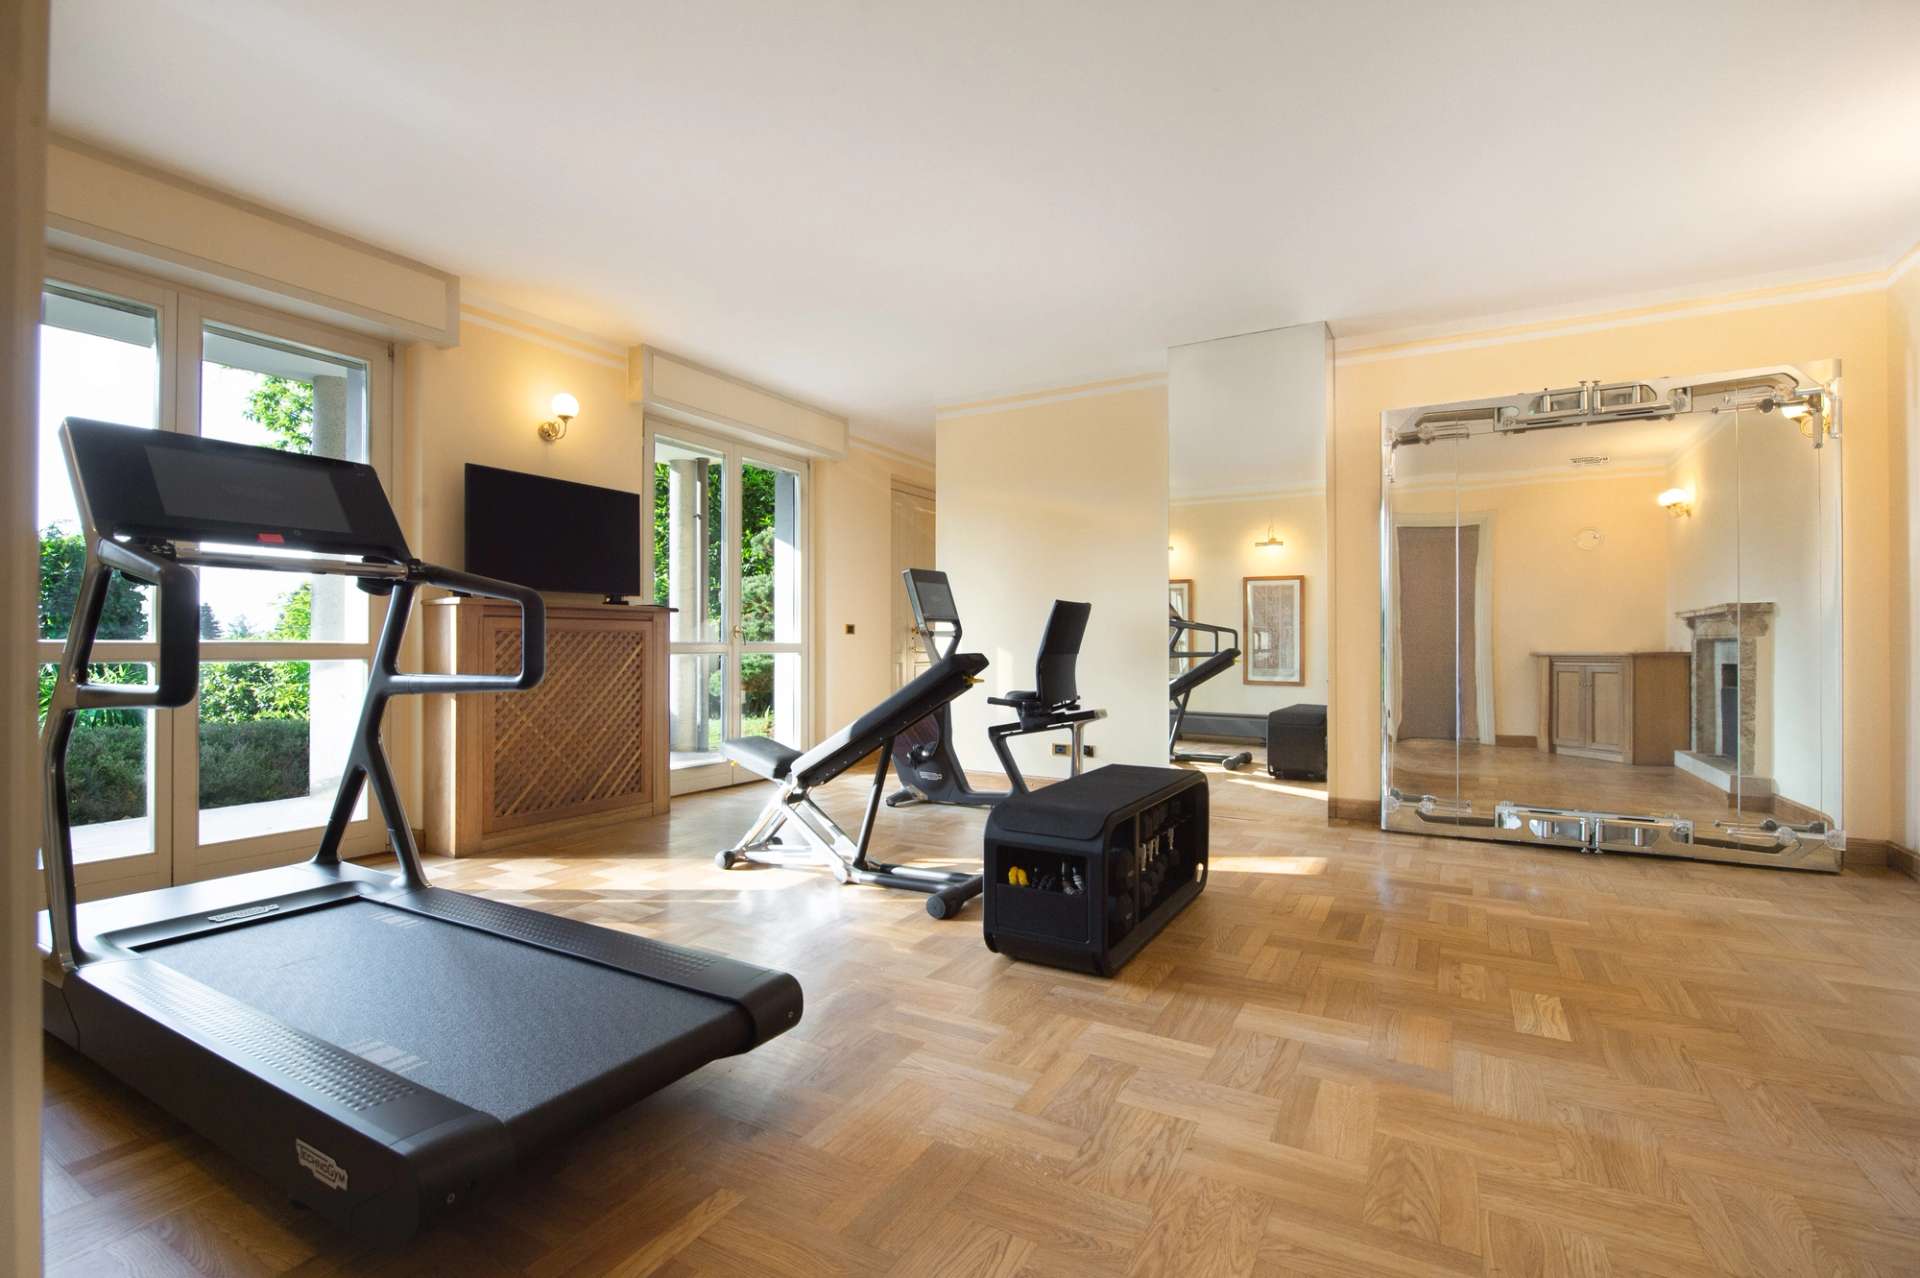 The gym of a luxury villa for rent